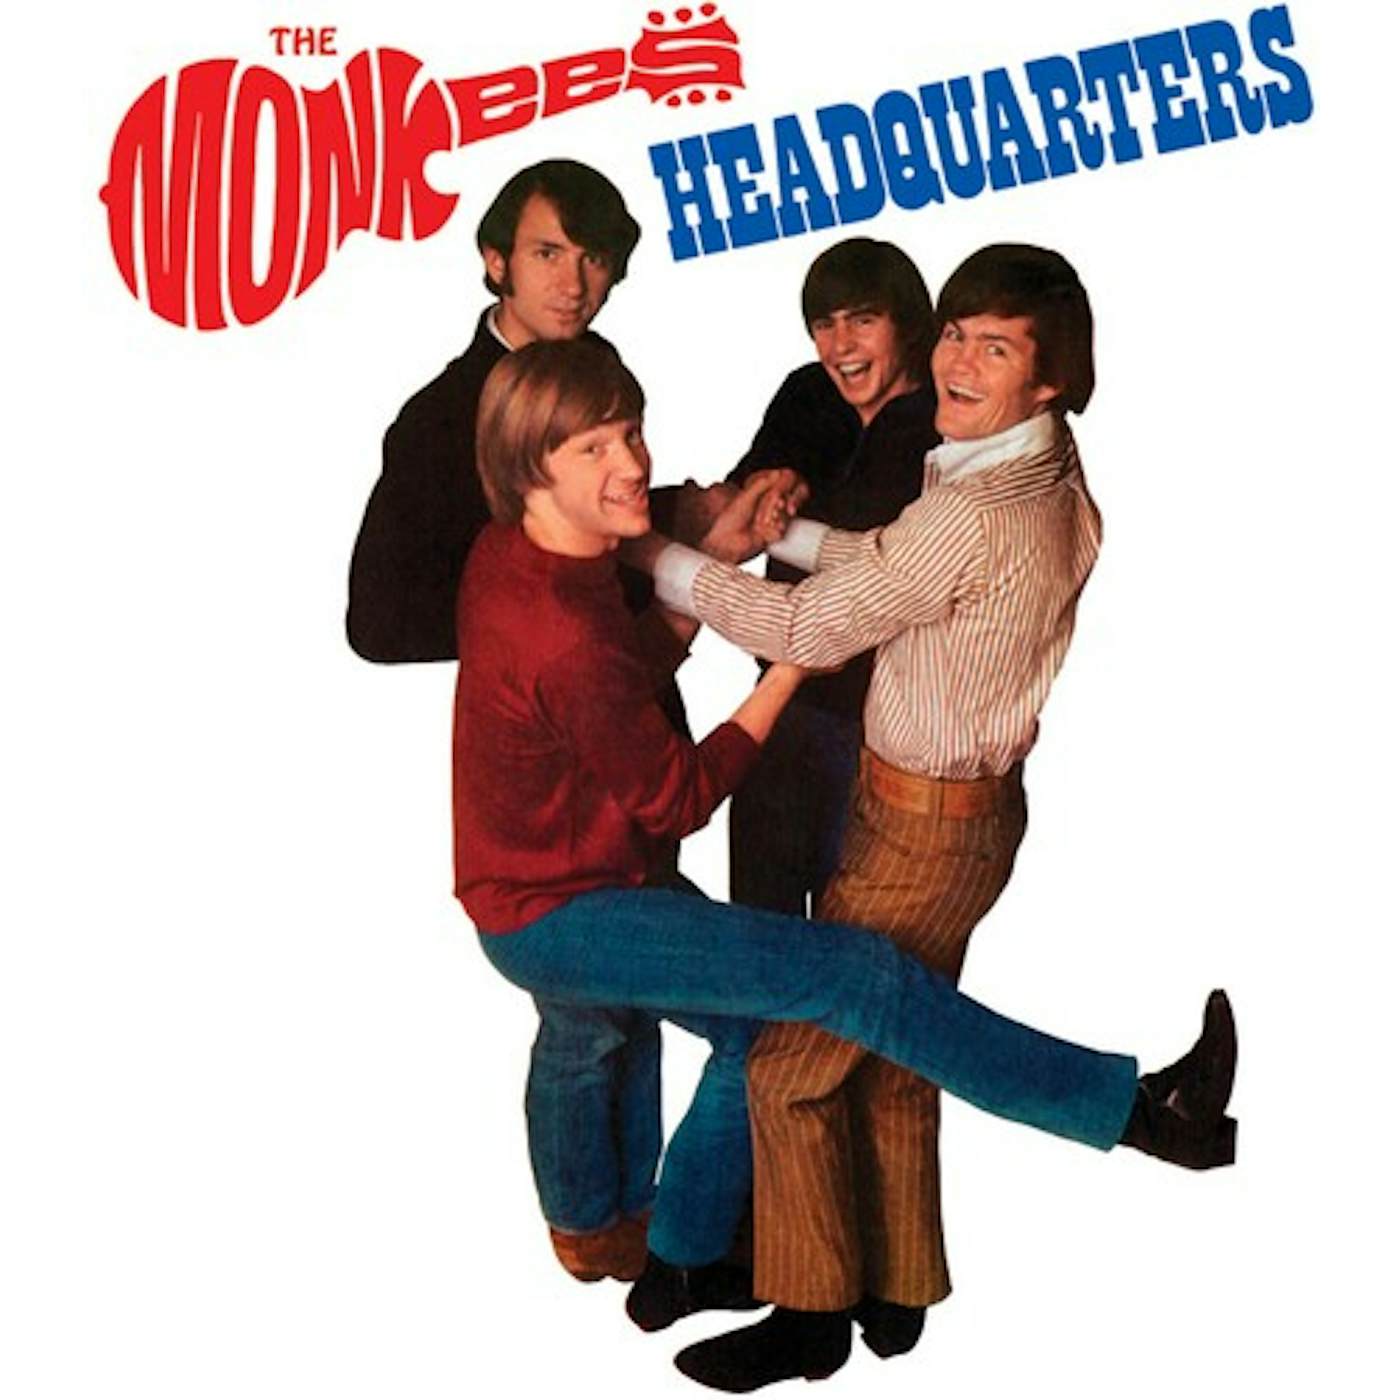 The Monkees Headquarters (Red) Vinyl Record